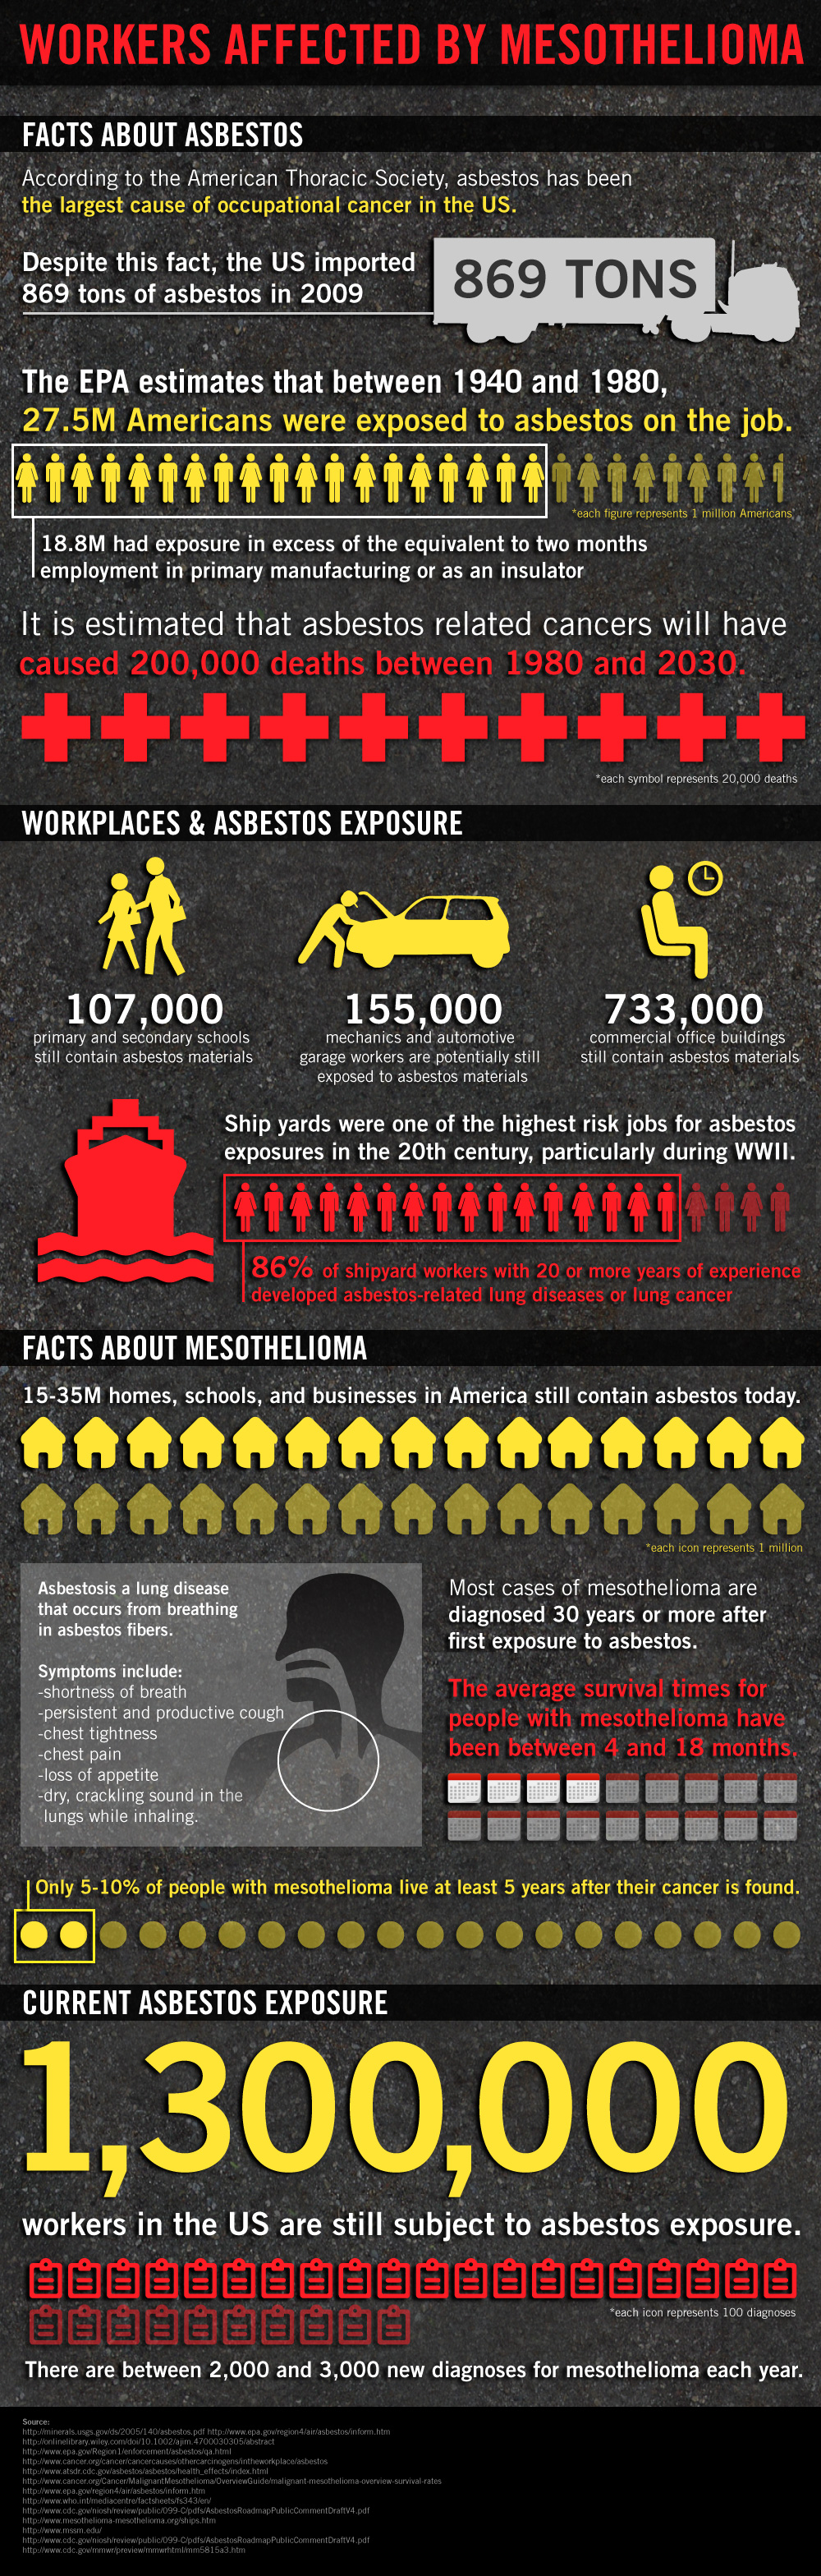 InfoGraphic on Workers affected by Mesothelioma,